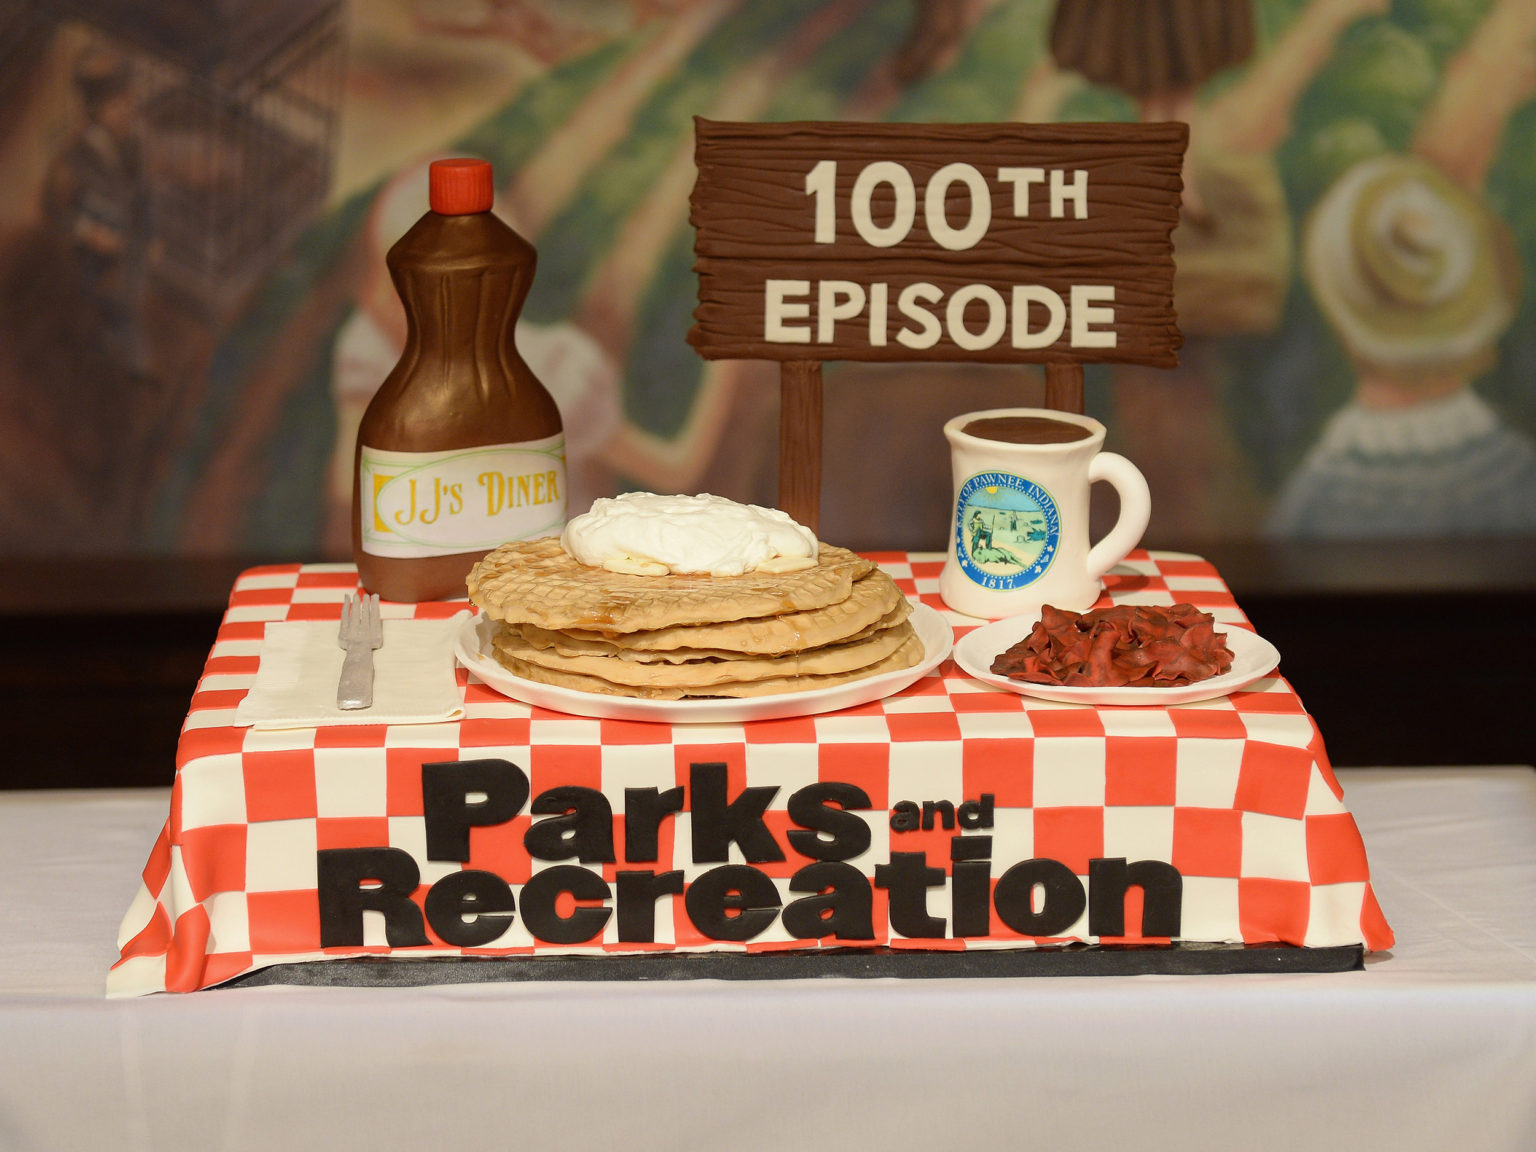 During its original run, "Parks and Recreation" lasted 125 episodes.